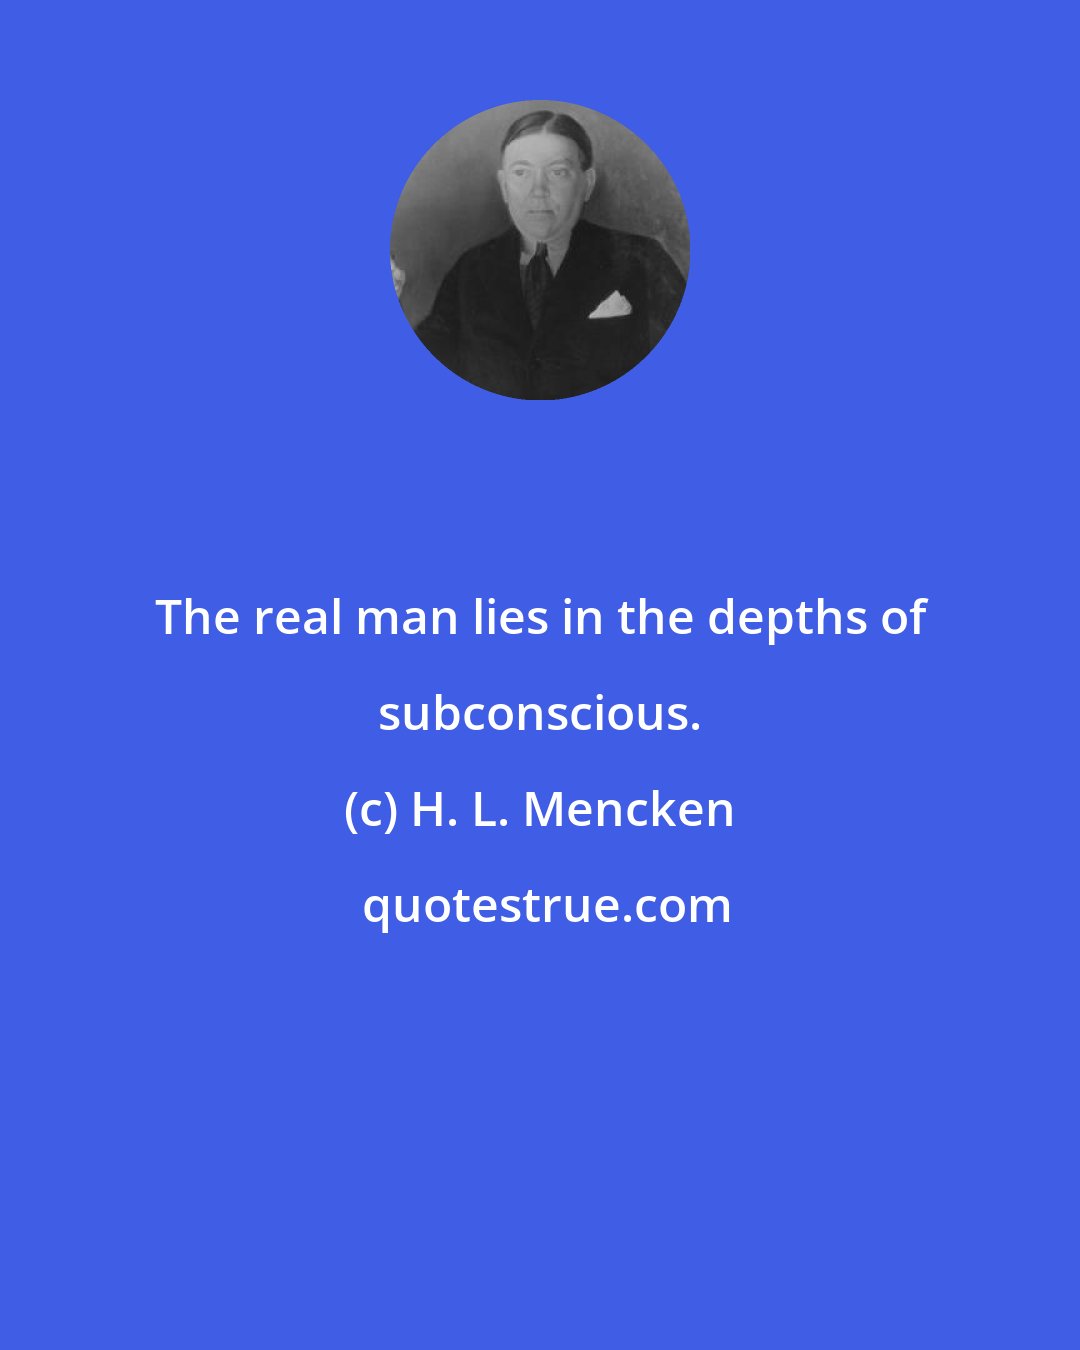 H. L. Mencken: The real man lies in the depths of subconscious.